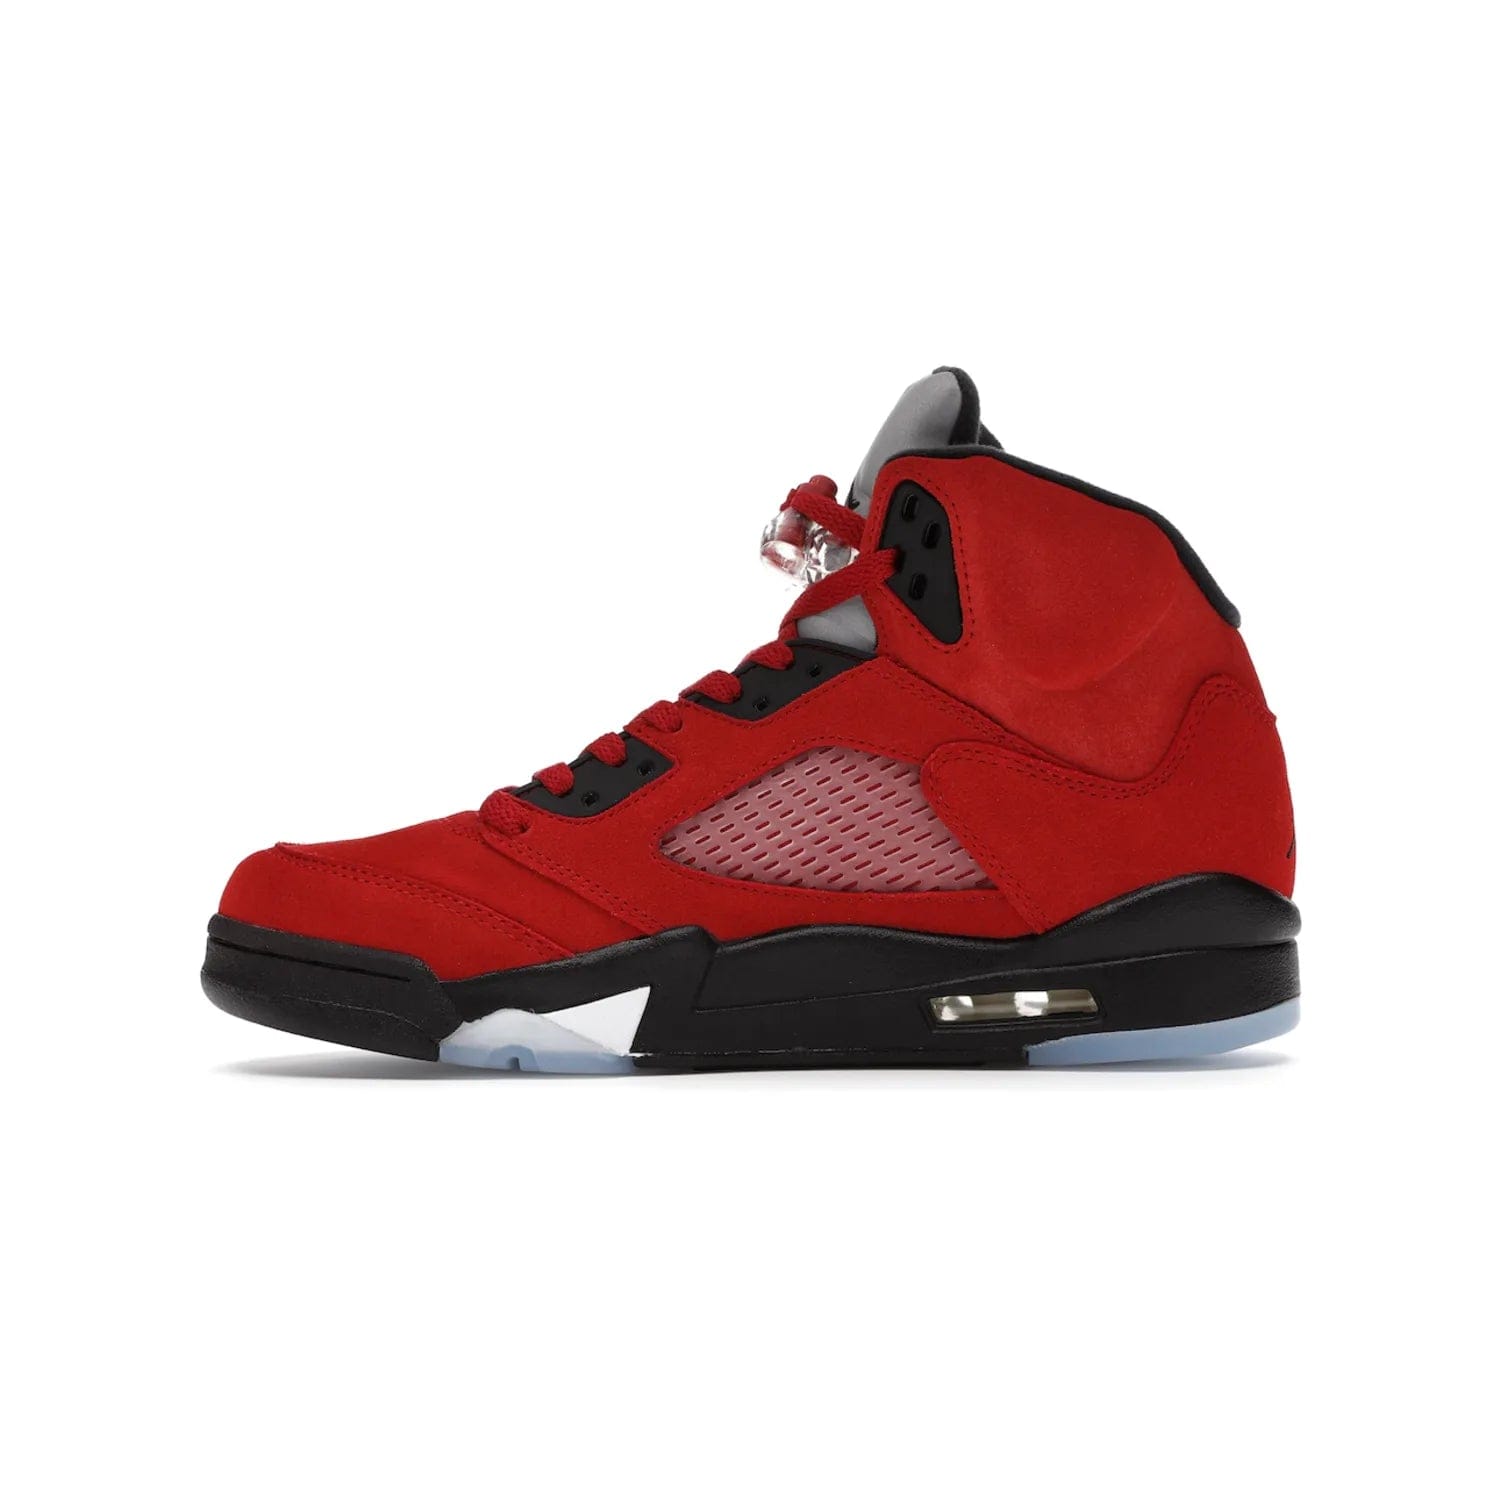 Jordan 5 Retro Raging Bull Red (2021) - Image 19 - Only at www.BallersClubKickz.com - Get ready for the 2021 stand-alone release of the Air Jordan 5 Raging Bulls! This all-suede upper combines luxe details like a Jumpman logo, red & black "23" embroidery and shark tooth detailing, atop a black midsole. Don't miss out - release date in April 2021 for $190.